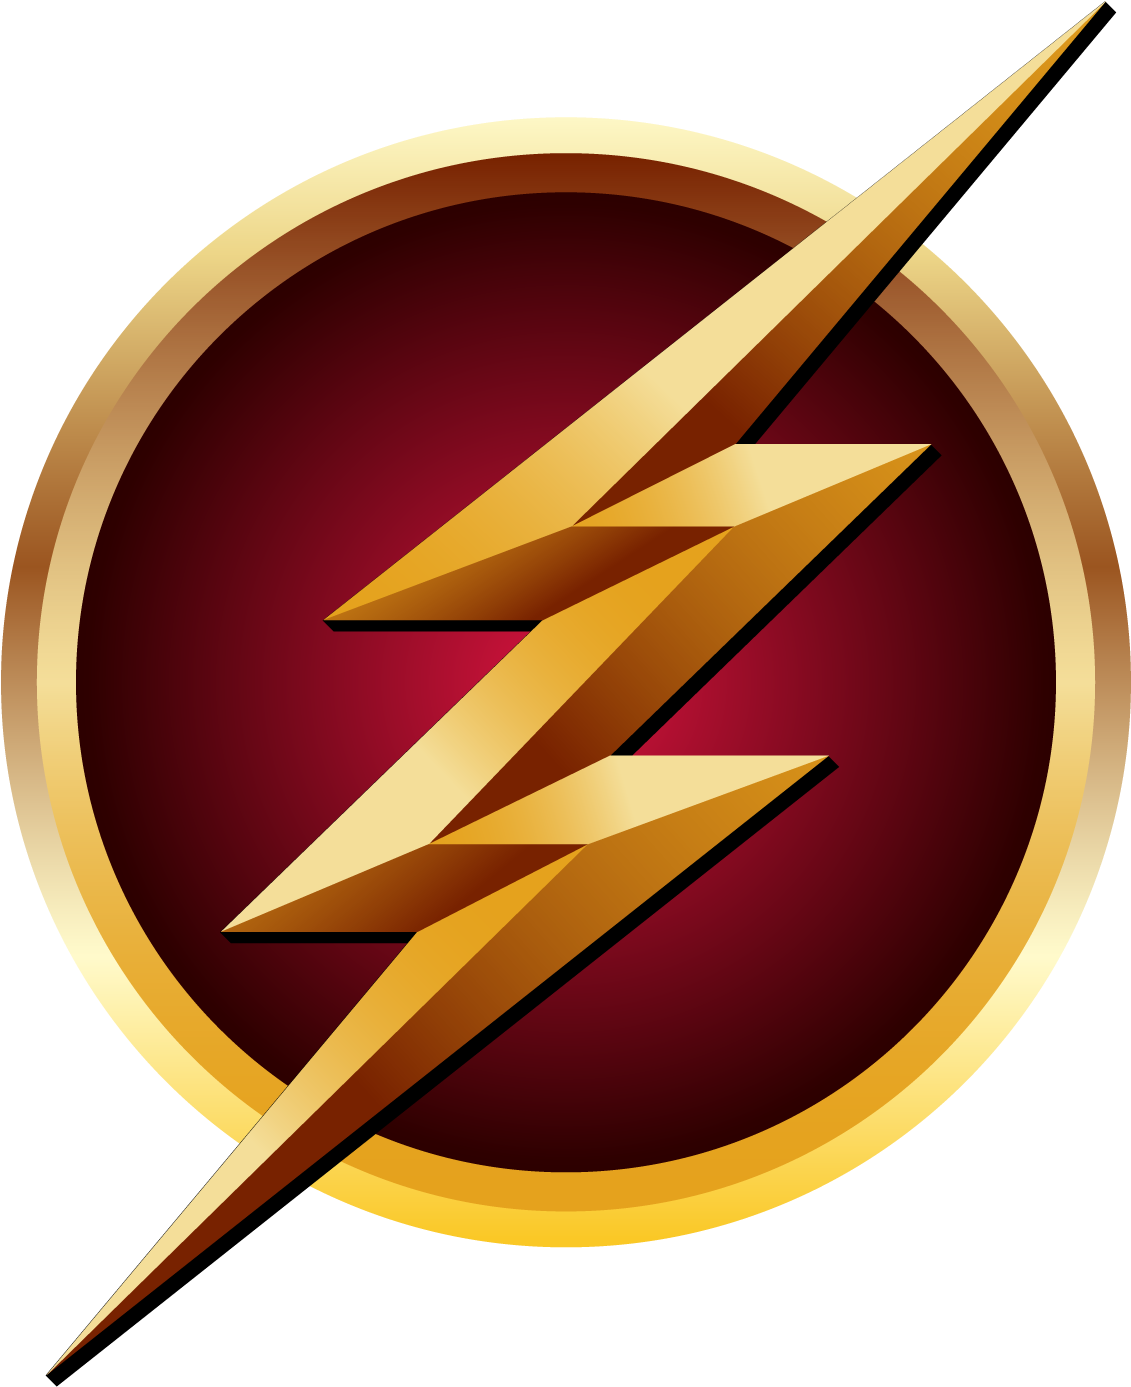 The Flash Logo Graphic PNG image